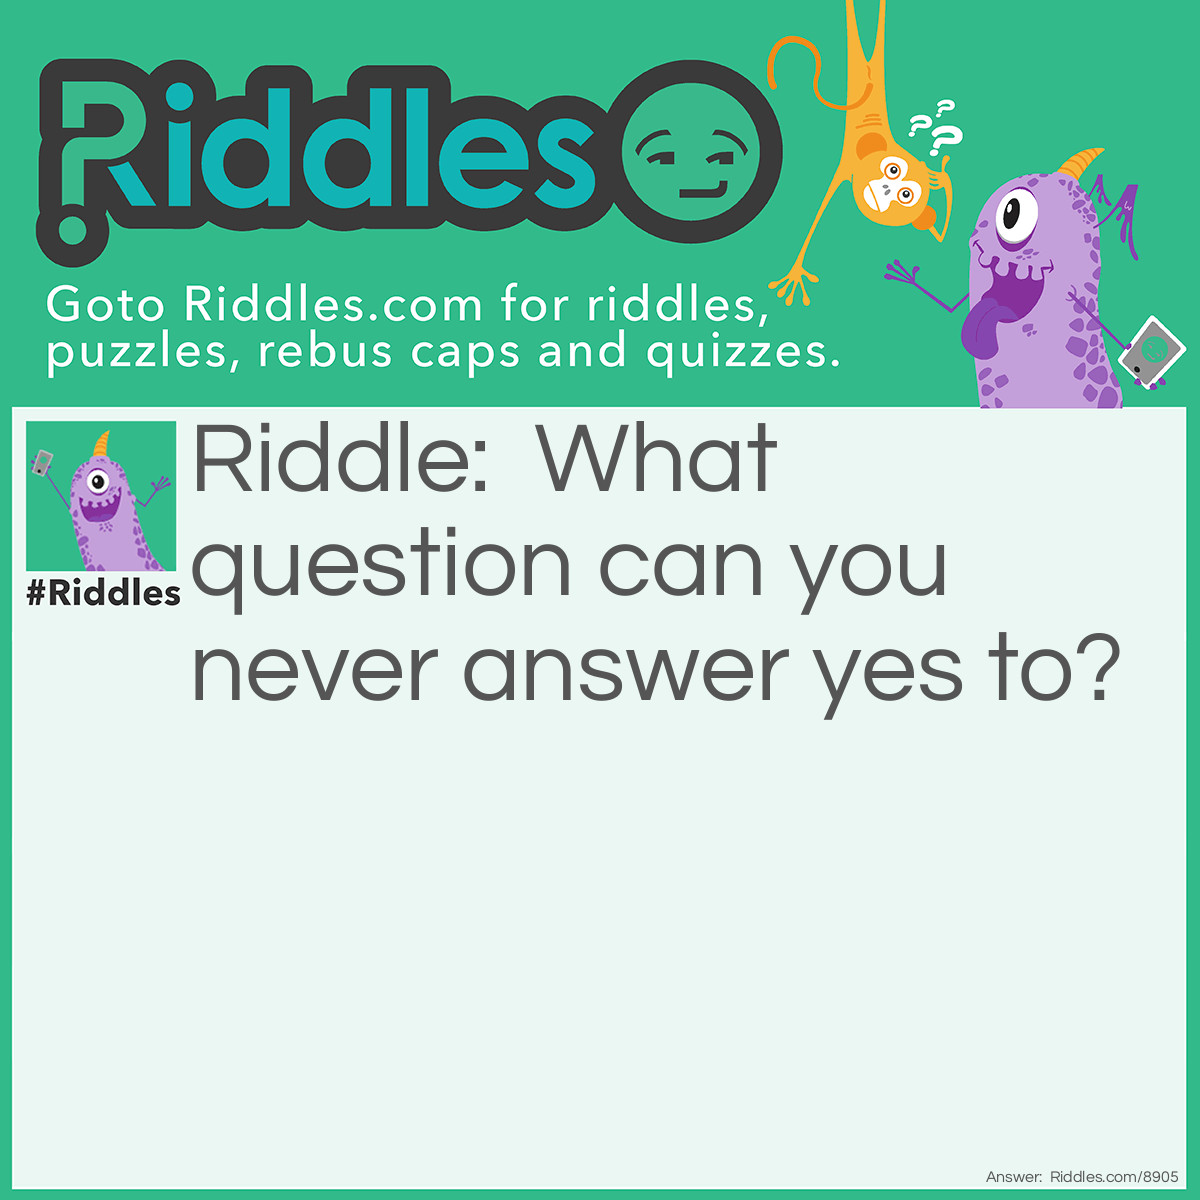 Riddle: What question can you never answer yes to? Answer: Are you asleep yet?